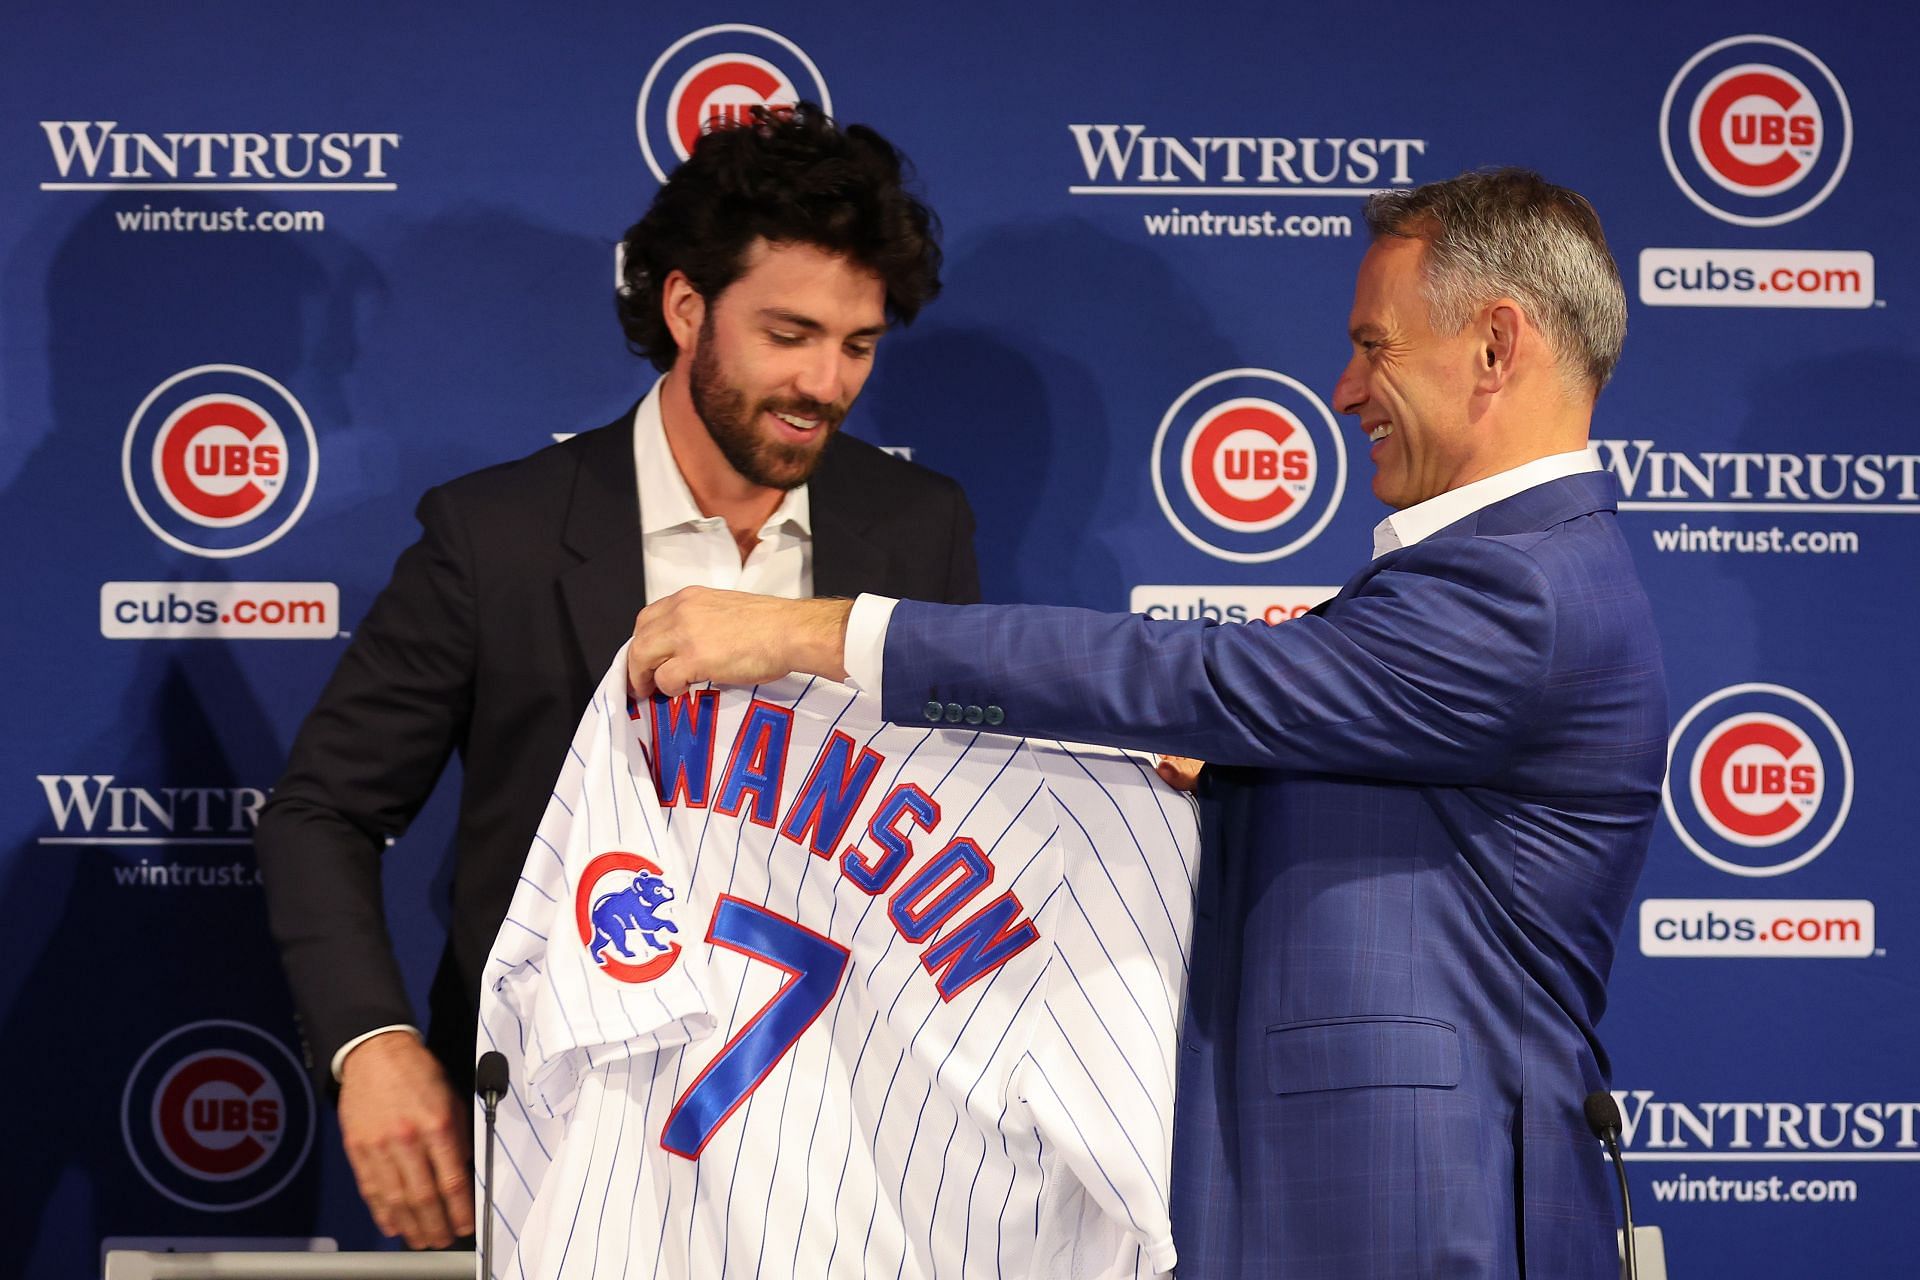 President Jed Hoyer of the Chicago Cubs presents a jersey to Dansby Swanson during his introductory news conference.